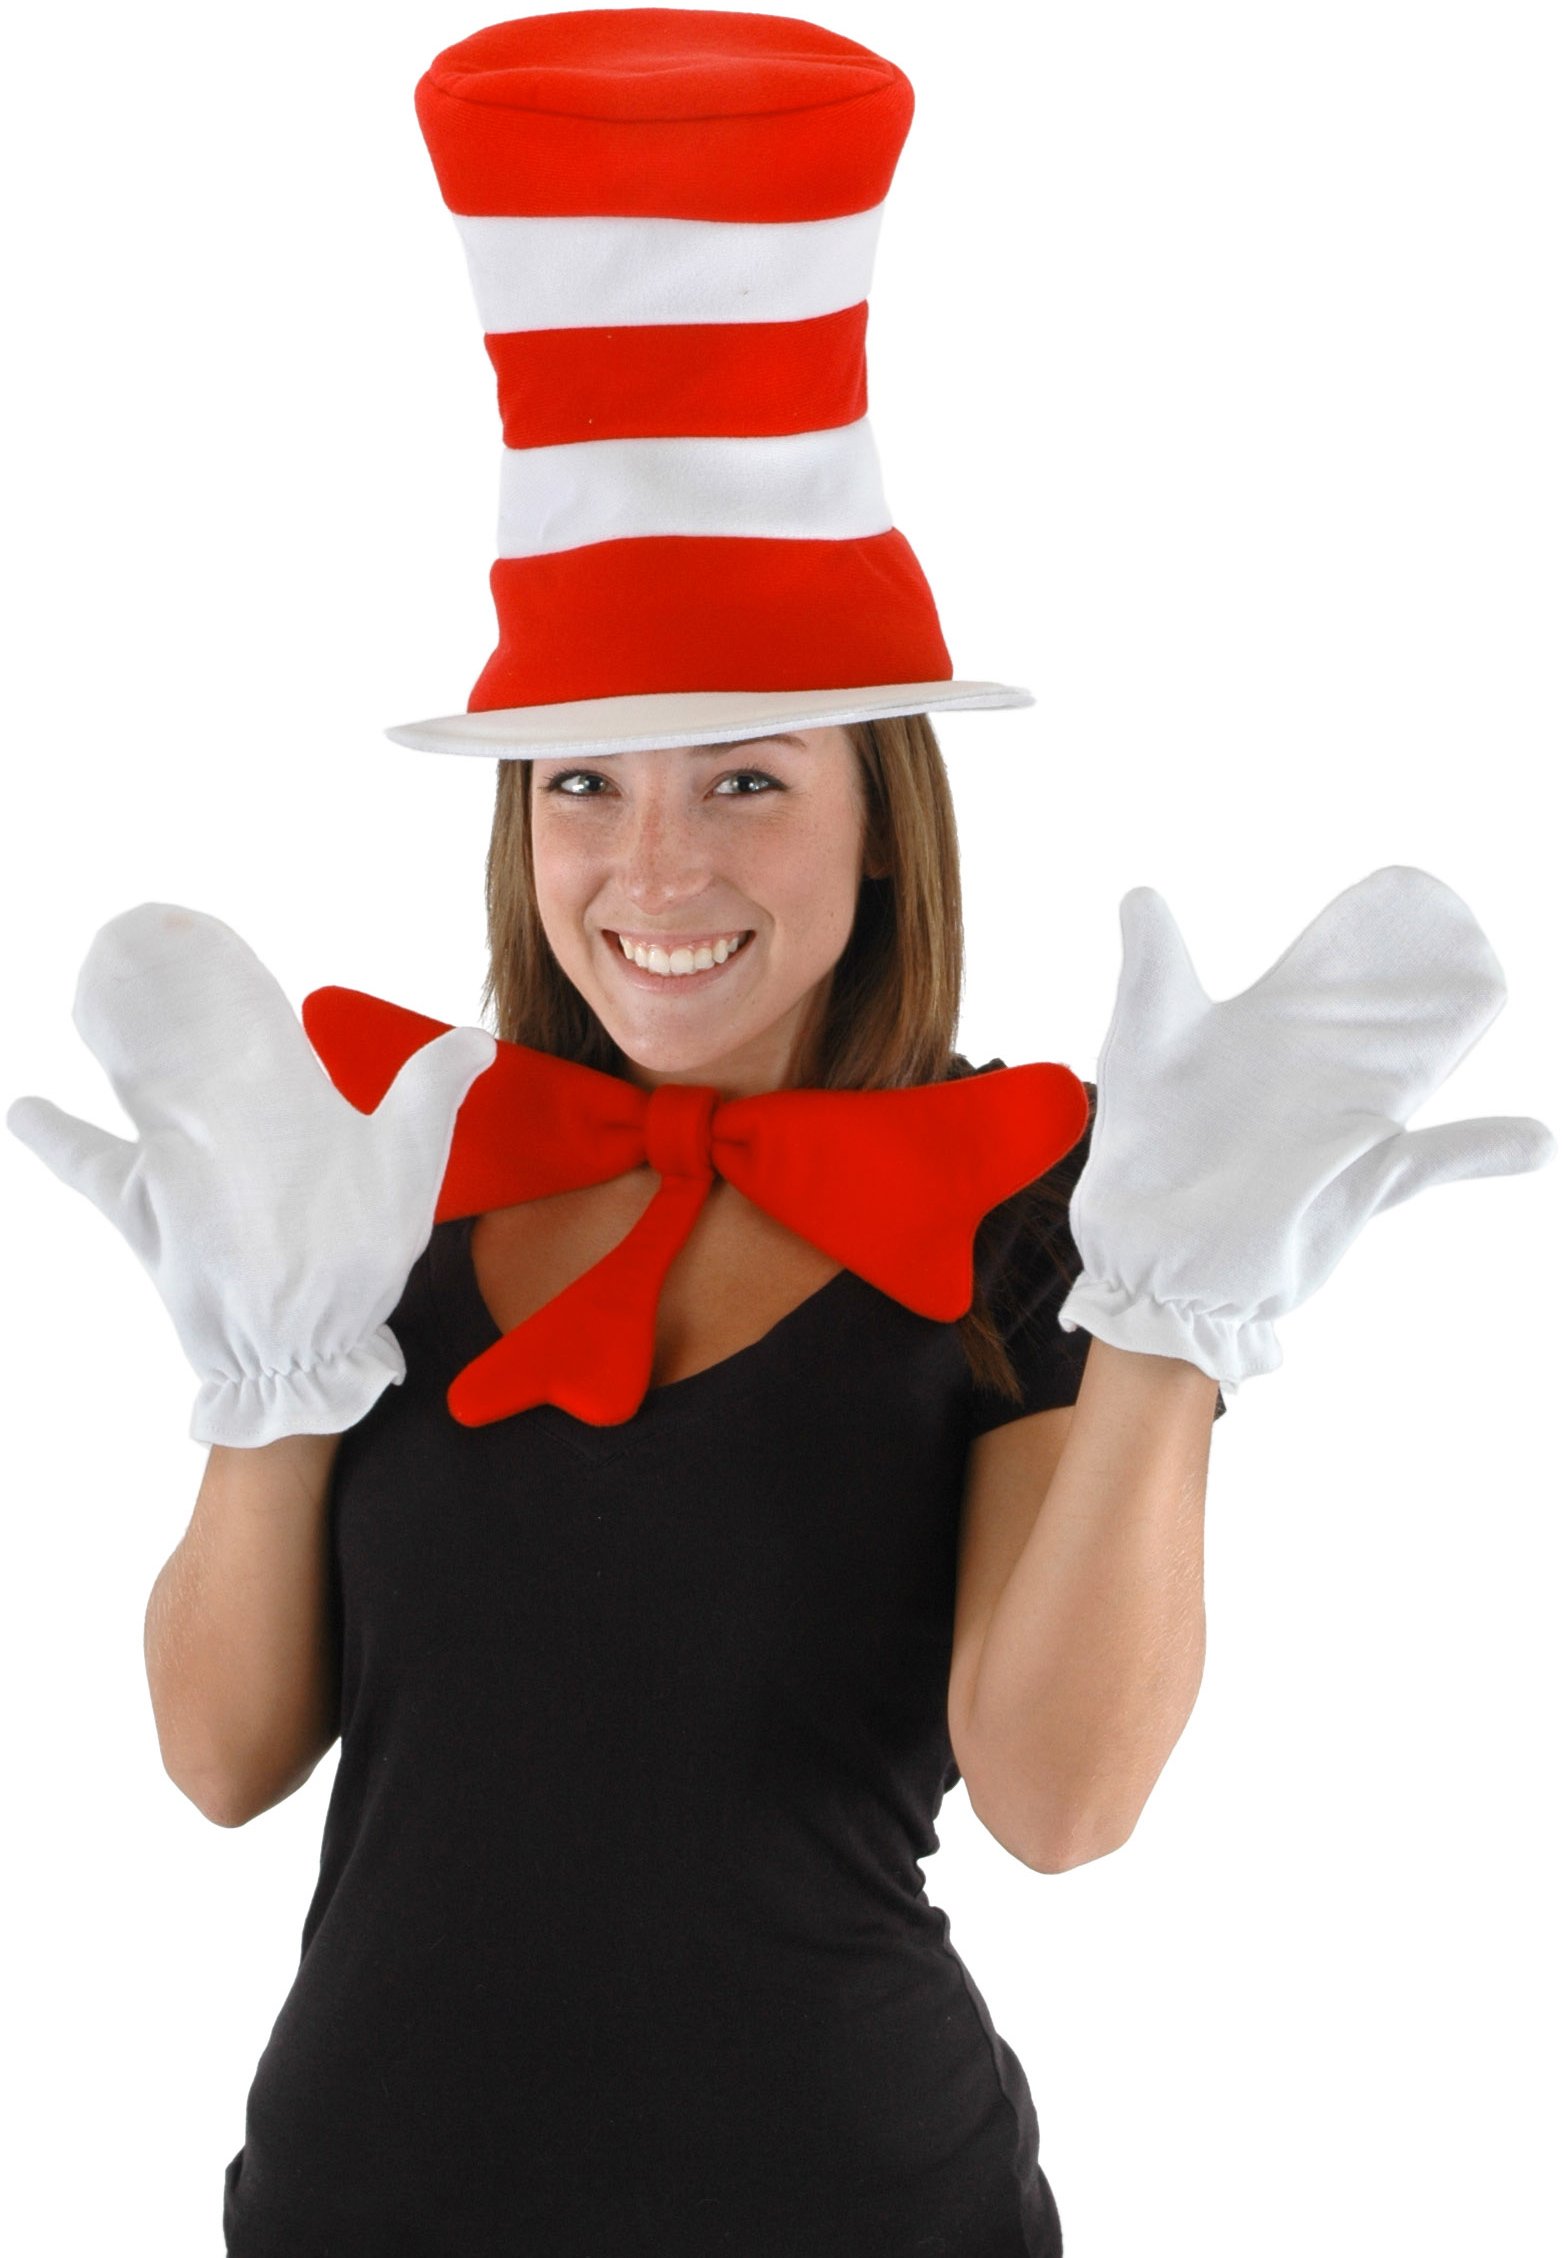 Dr. Seuss The Cat in the Hat - The Cat in the Hat Accessory Kit